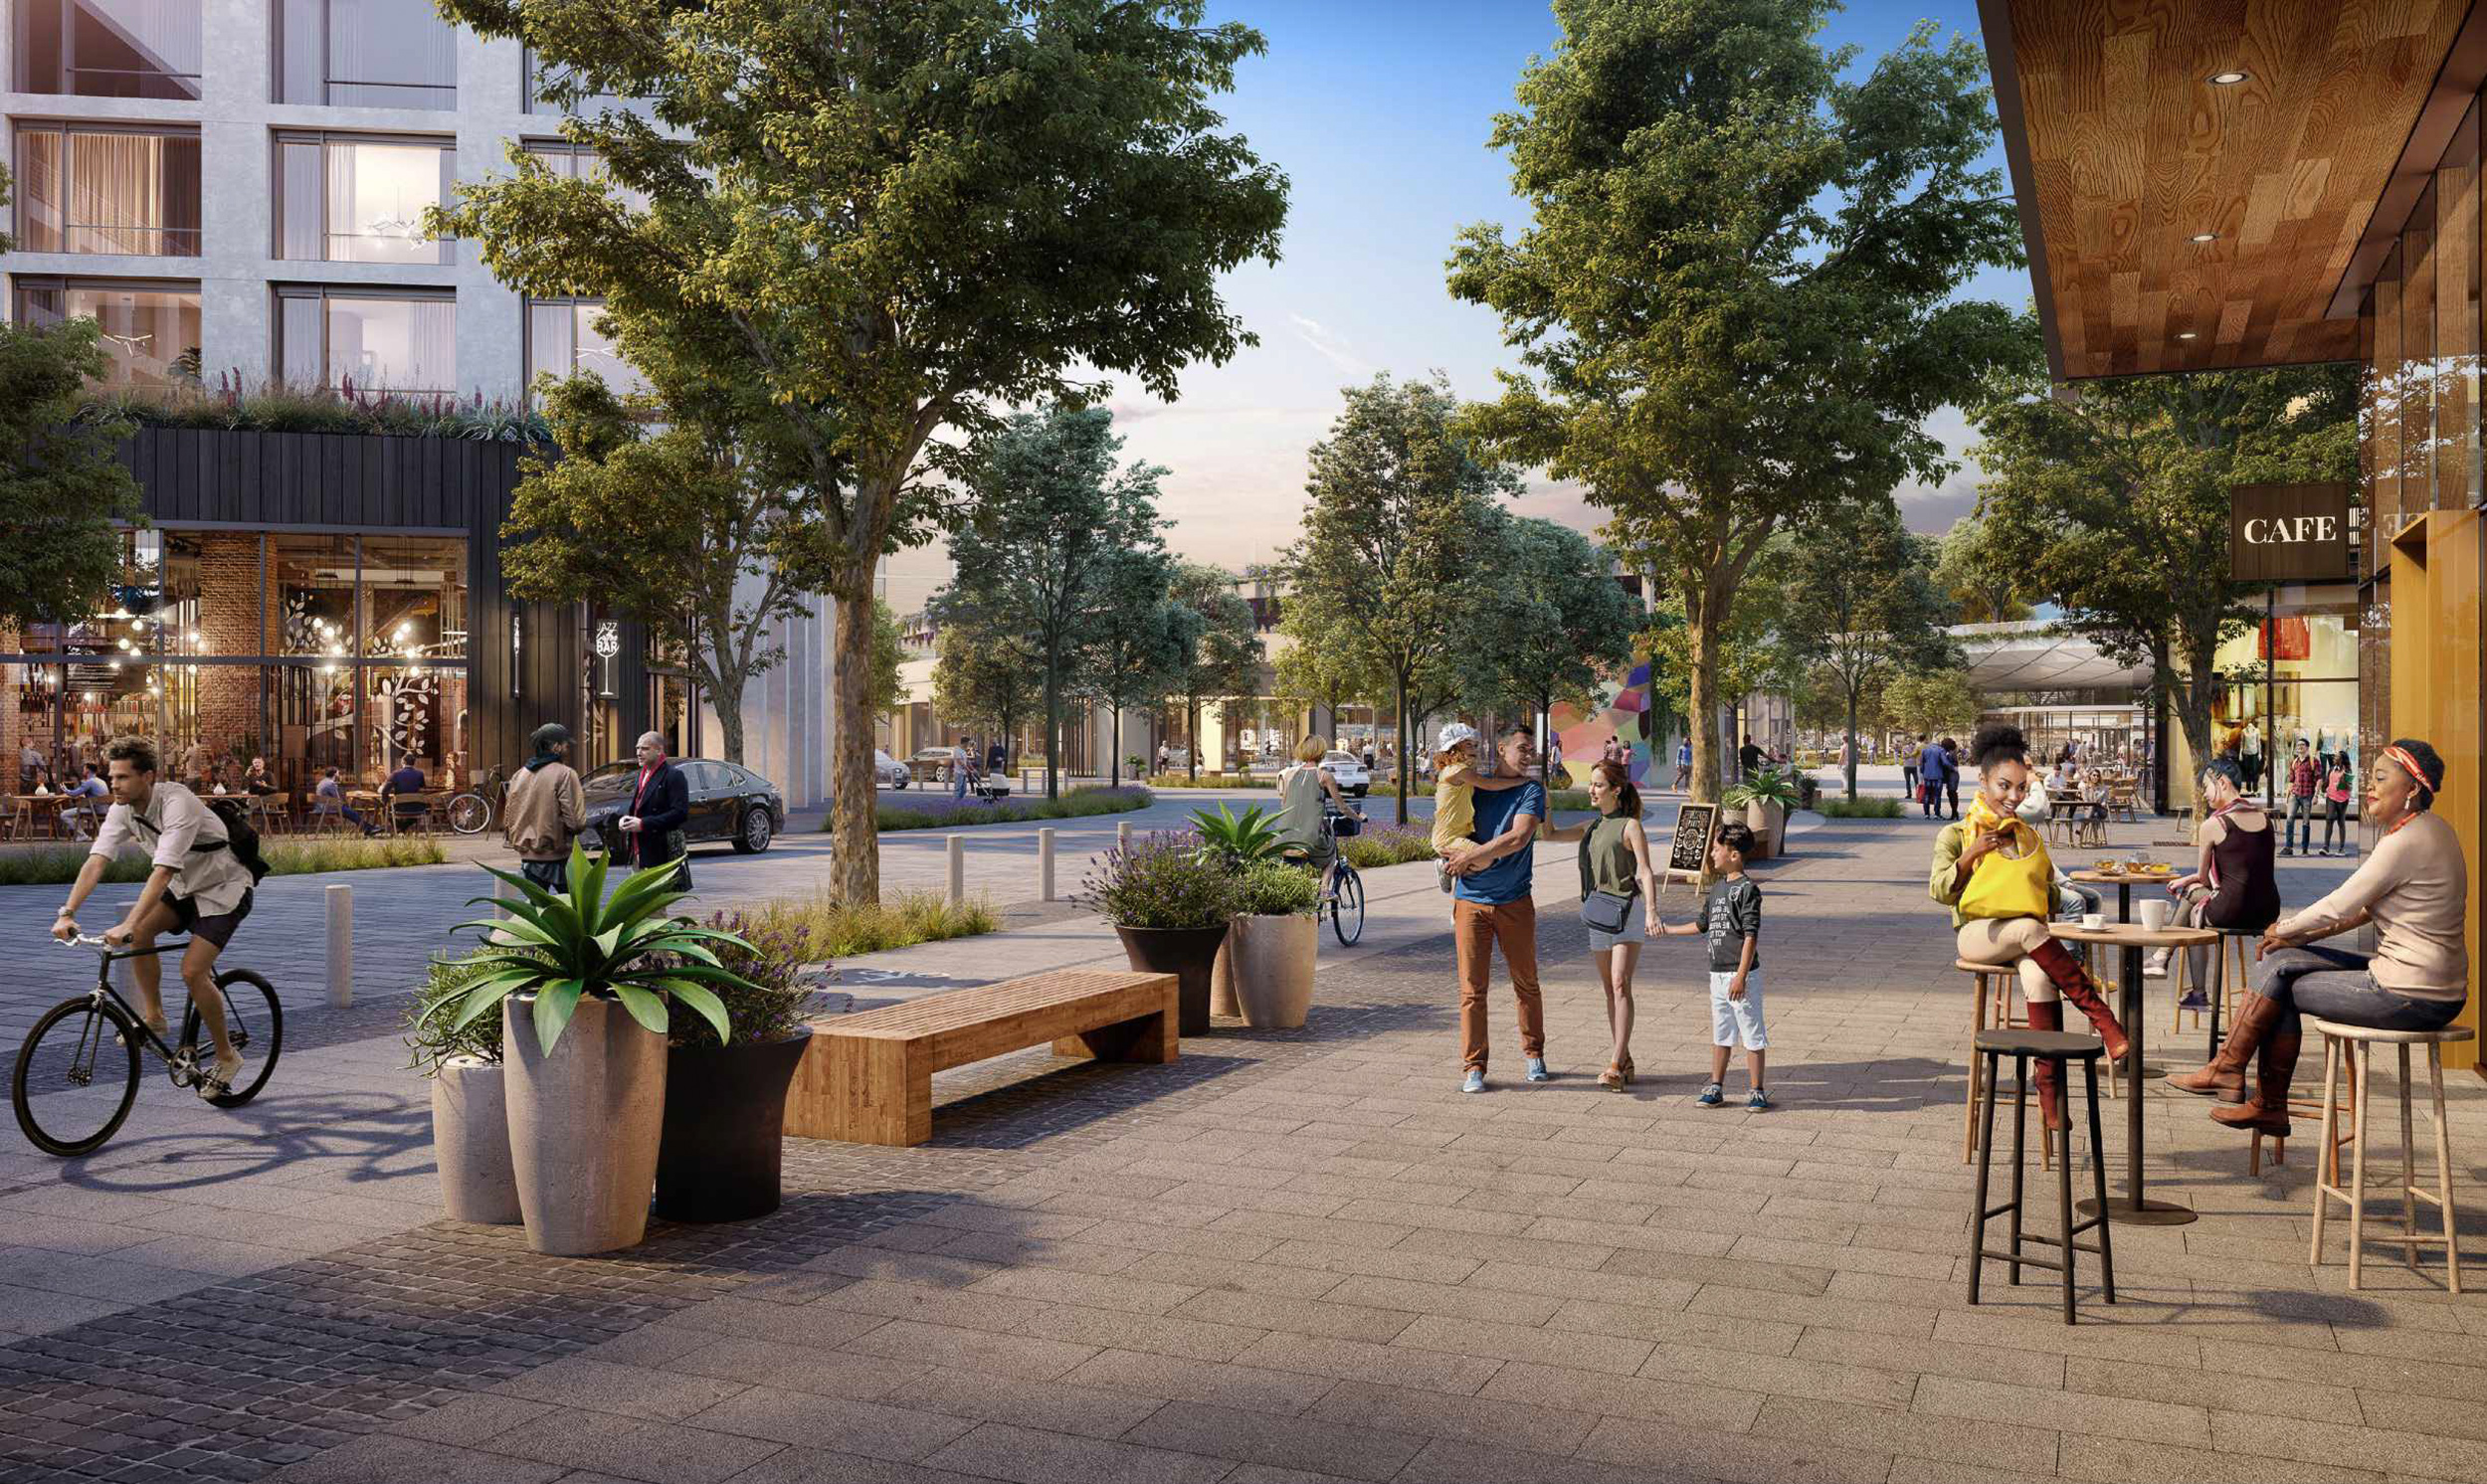 Willow Village street activity visualized, rendering courtesy Meta and Signature Development